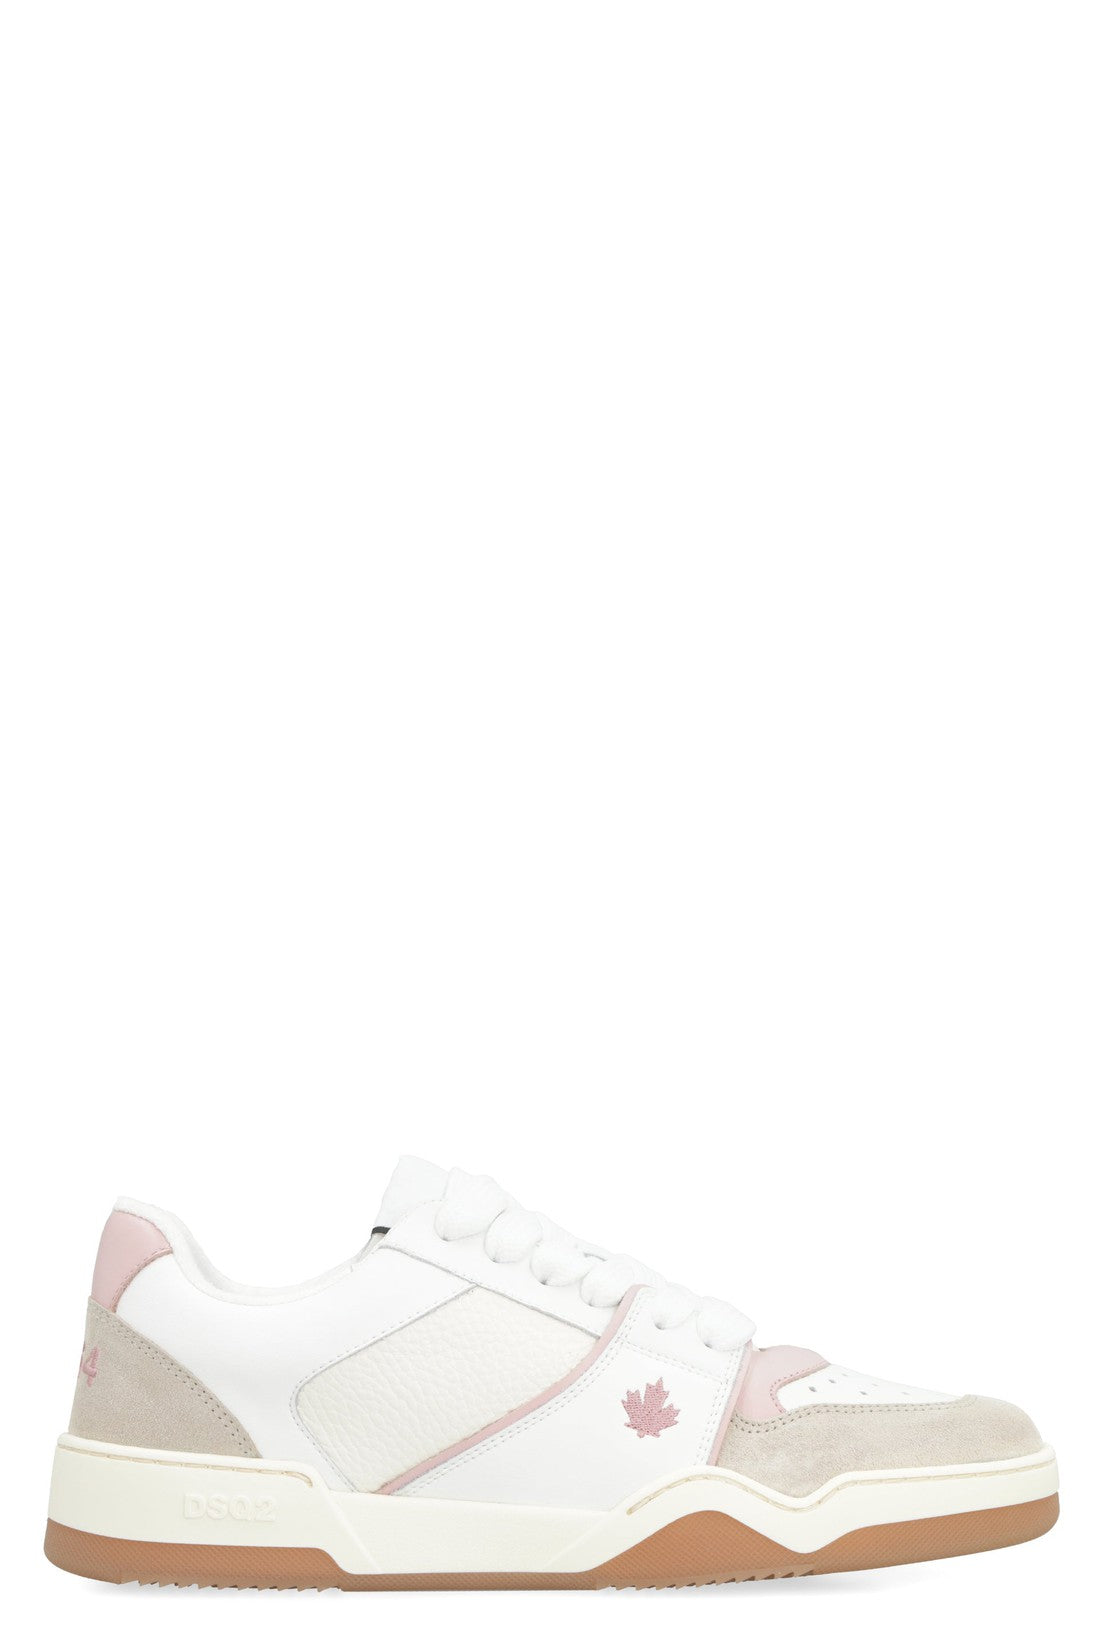 Dsquared2-OUTLET-SALE-Spiker leather low-top sneakers-ARCHIVIST